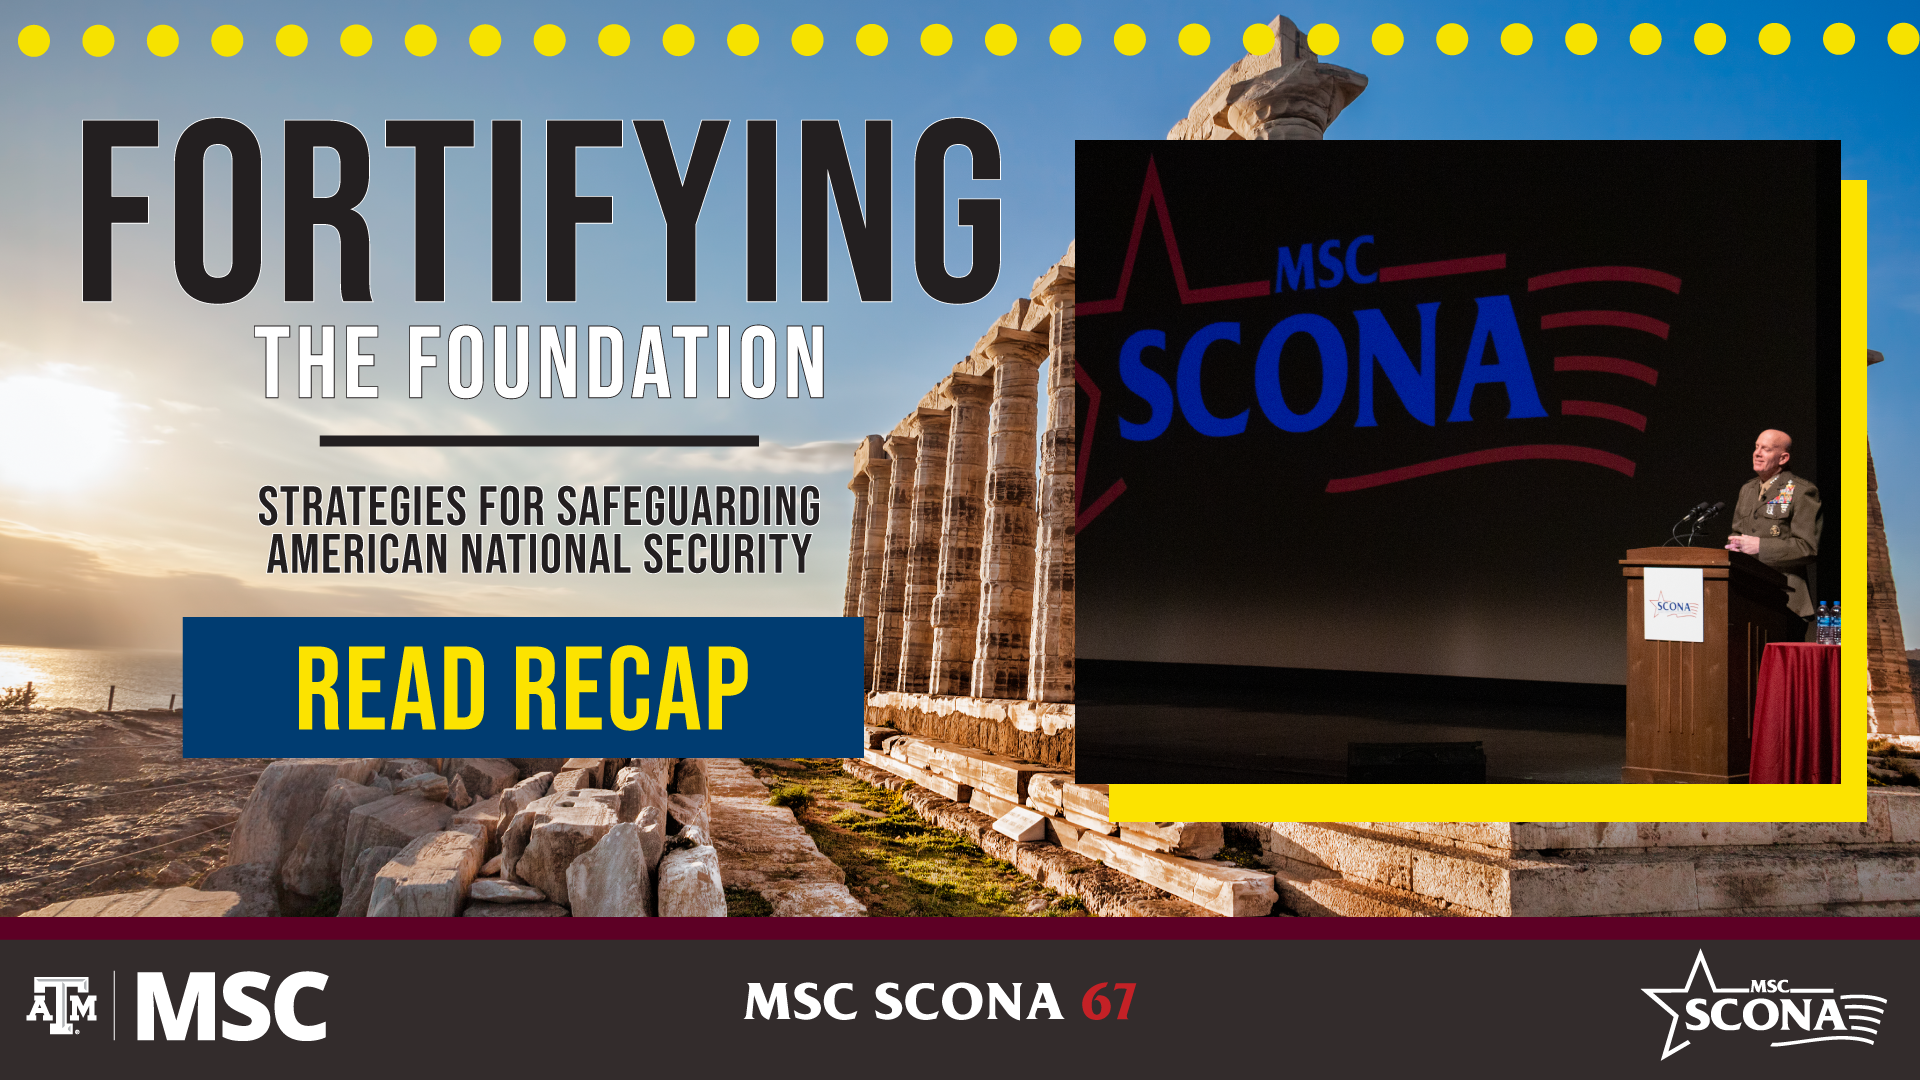 MSC SCONA 67 Fortifying the Foundation, Strategies for Safeguarding american national security. Read Recap